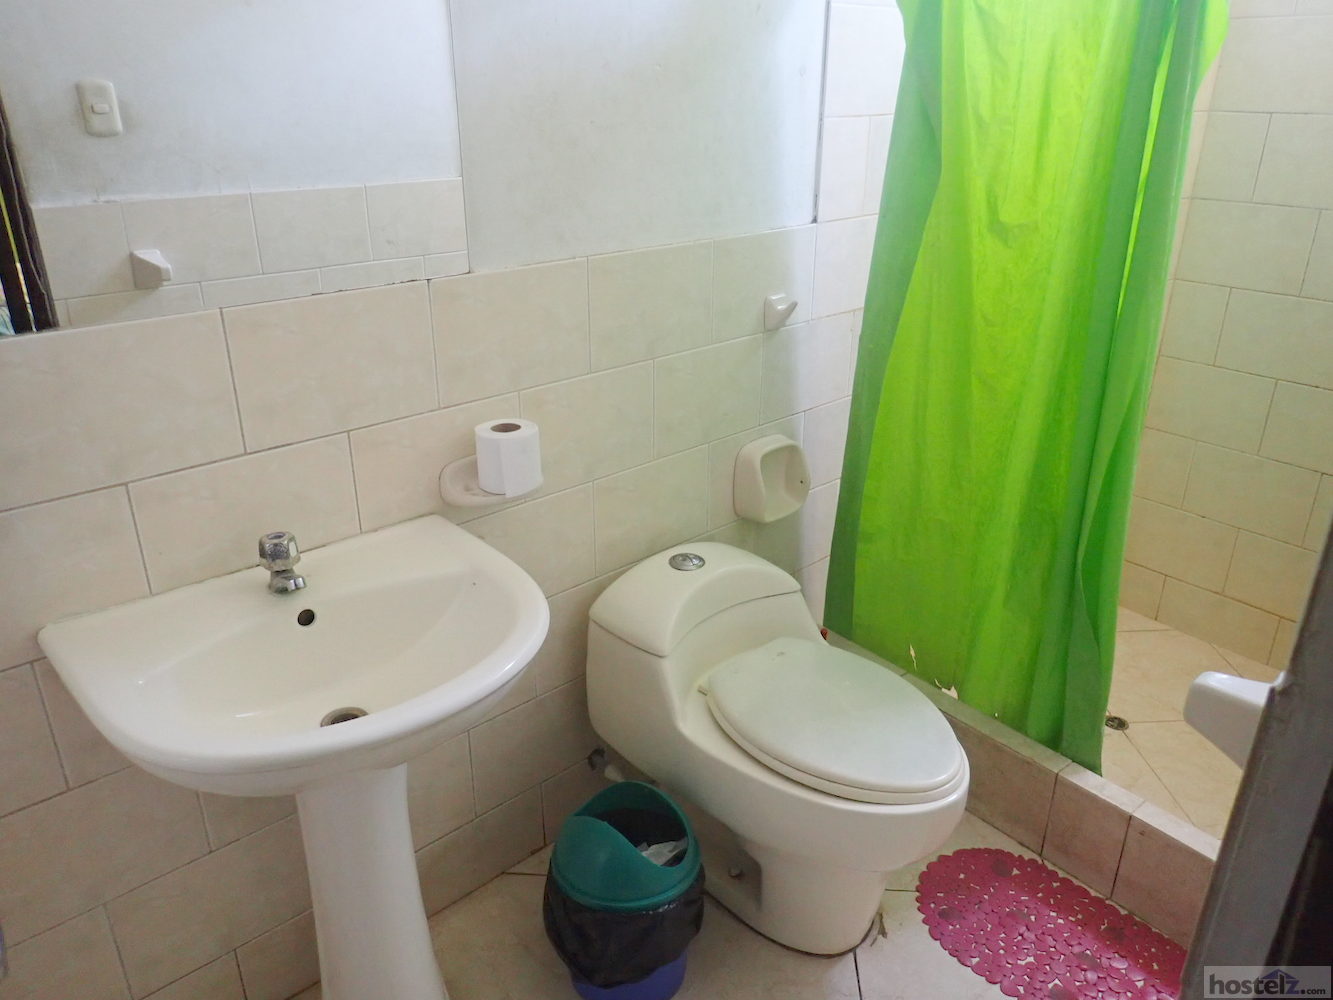 Shared bathroom in six bed dorm